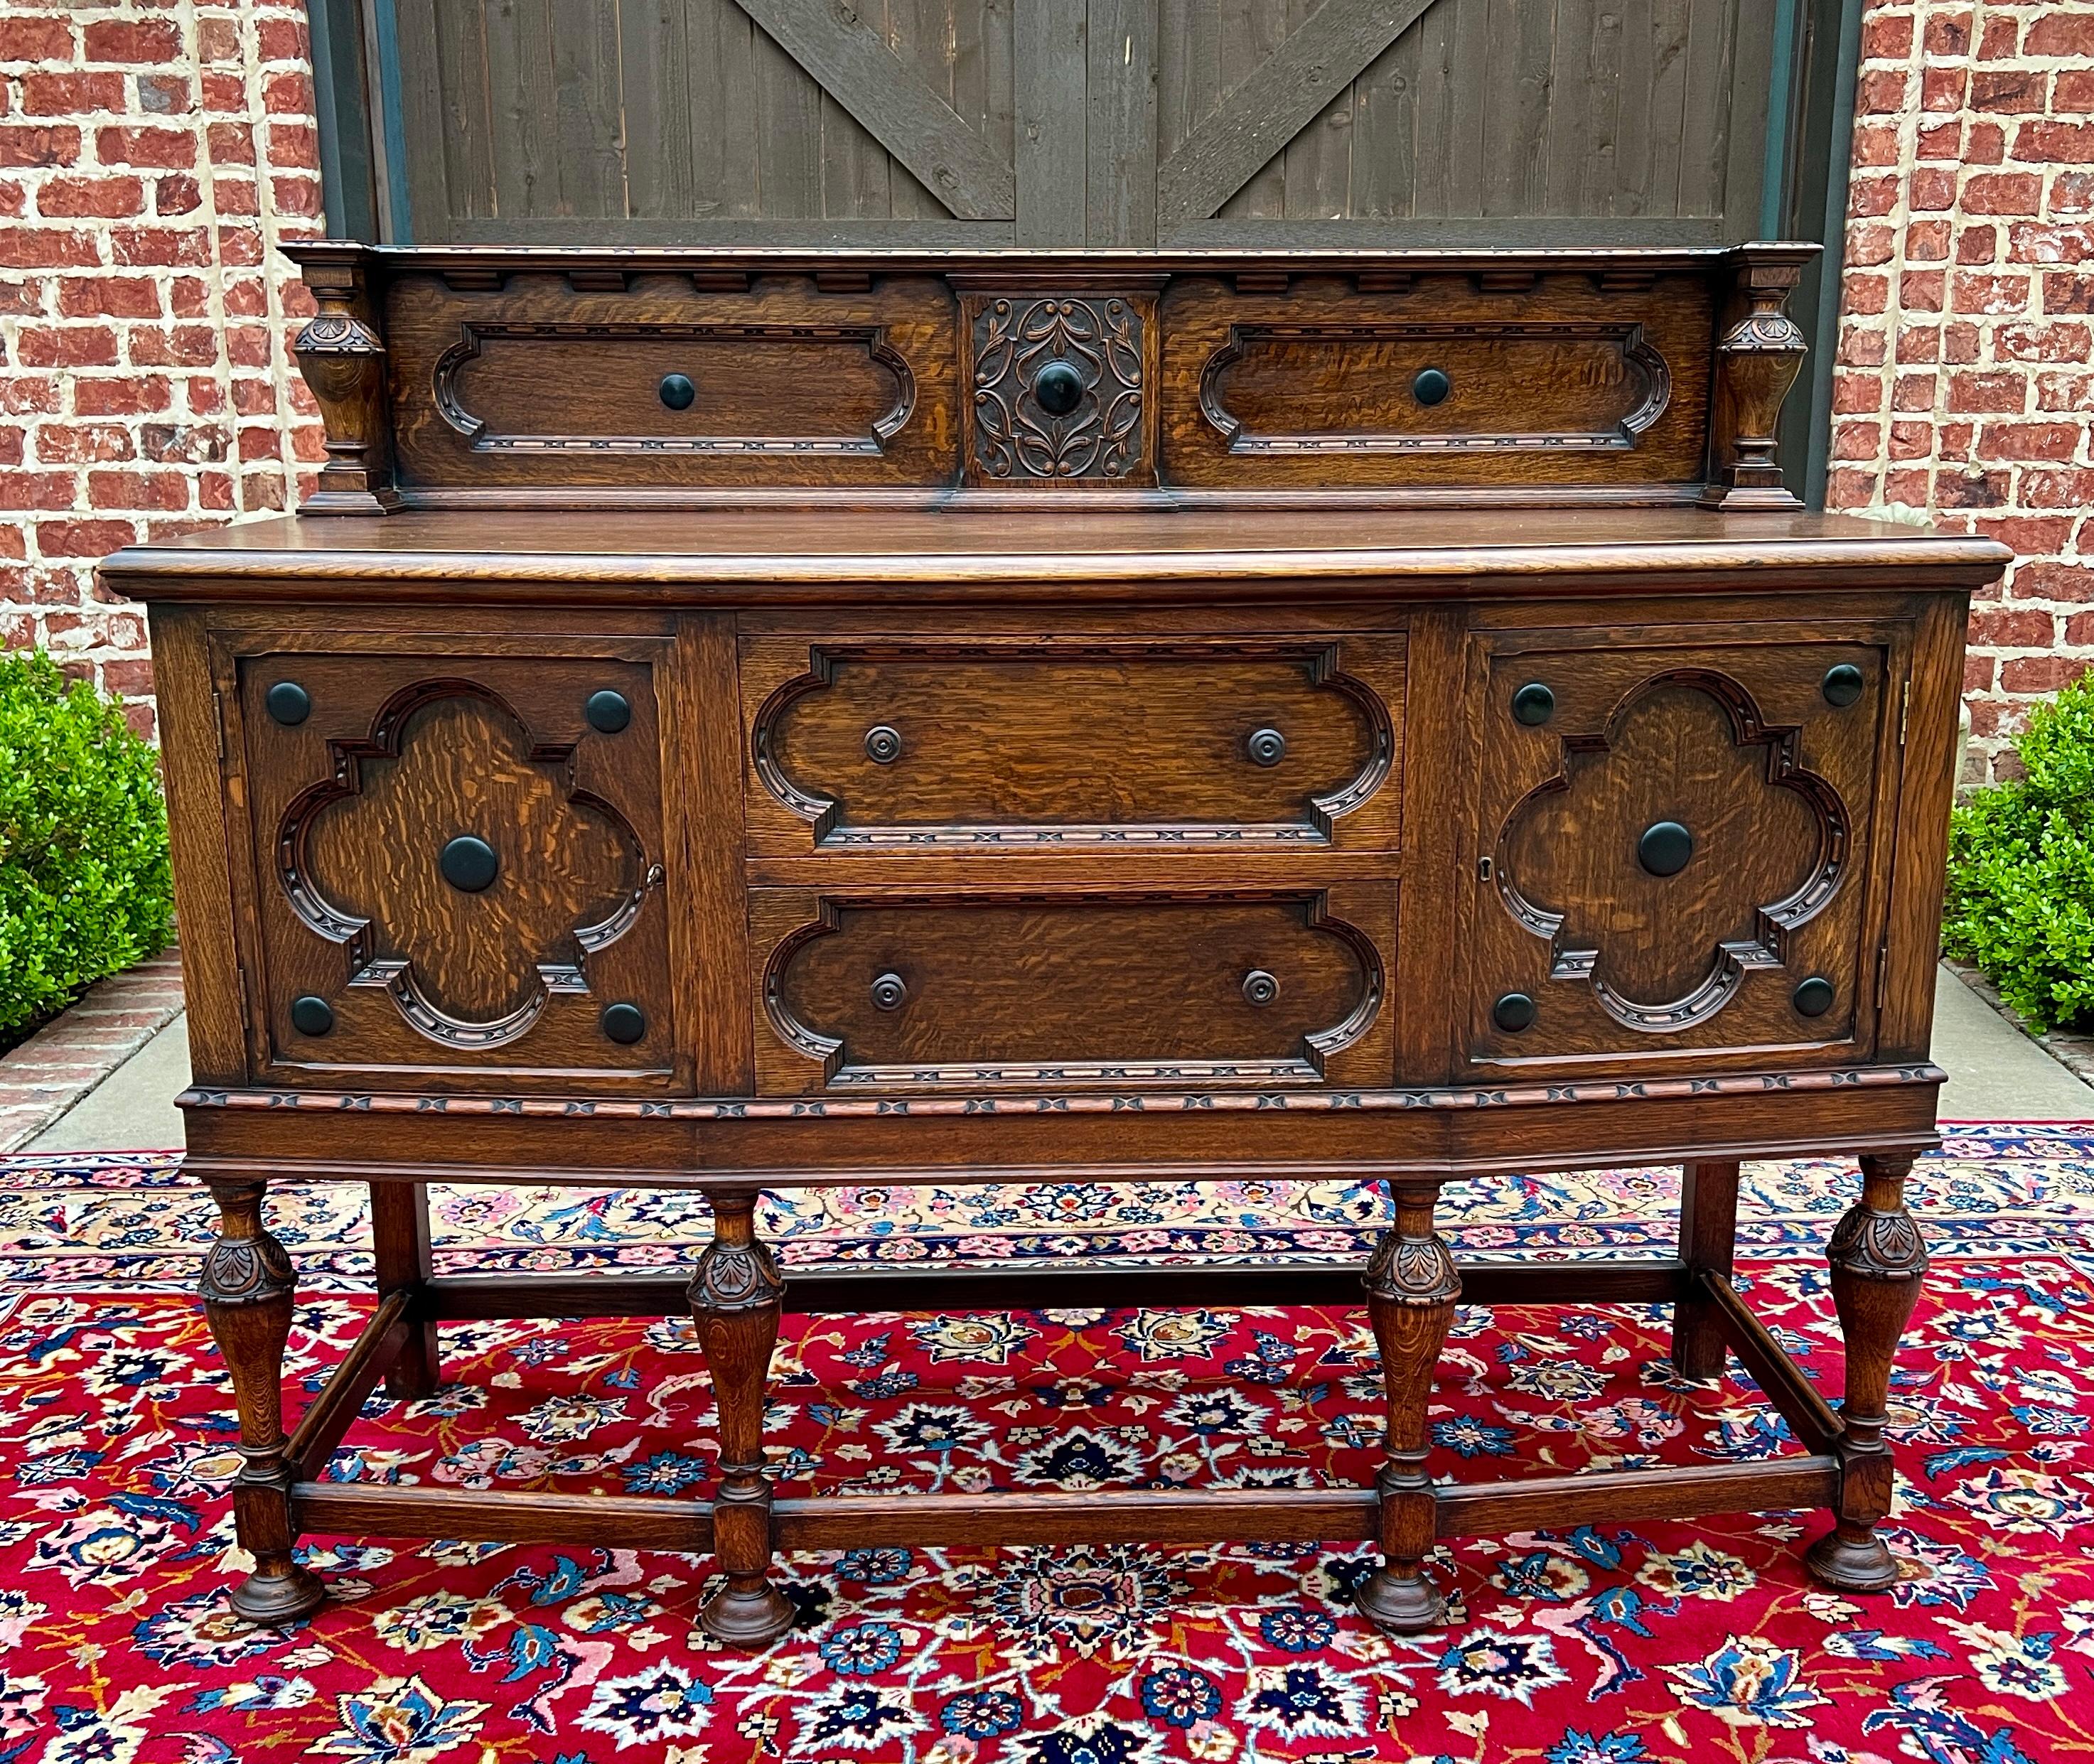     Charming LARGE Antique English Oak Jacobean Bow Front Sideboard, Server or Buffet 

    Felt-lined (original felt) silverware drawer and pullout cellarette~~2 large drawers (6.5